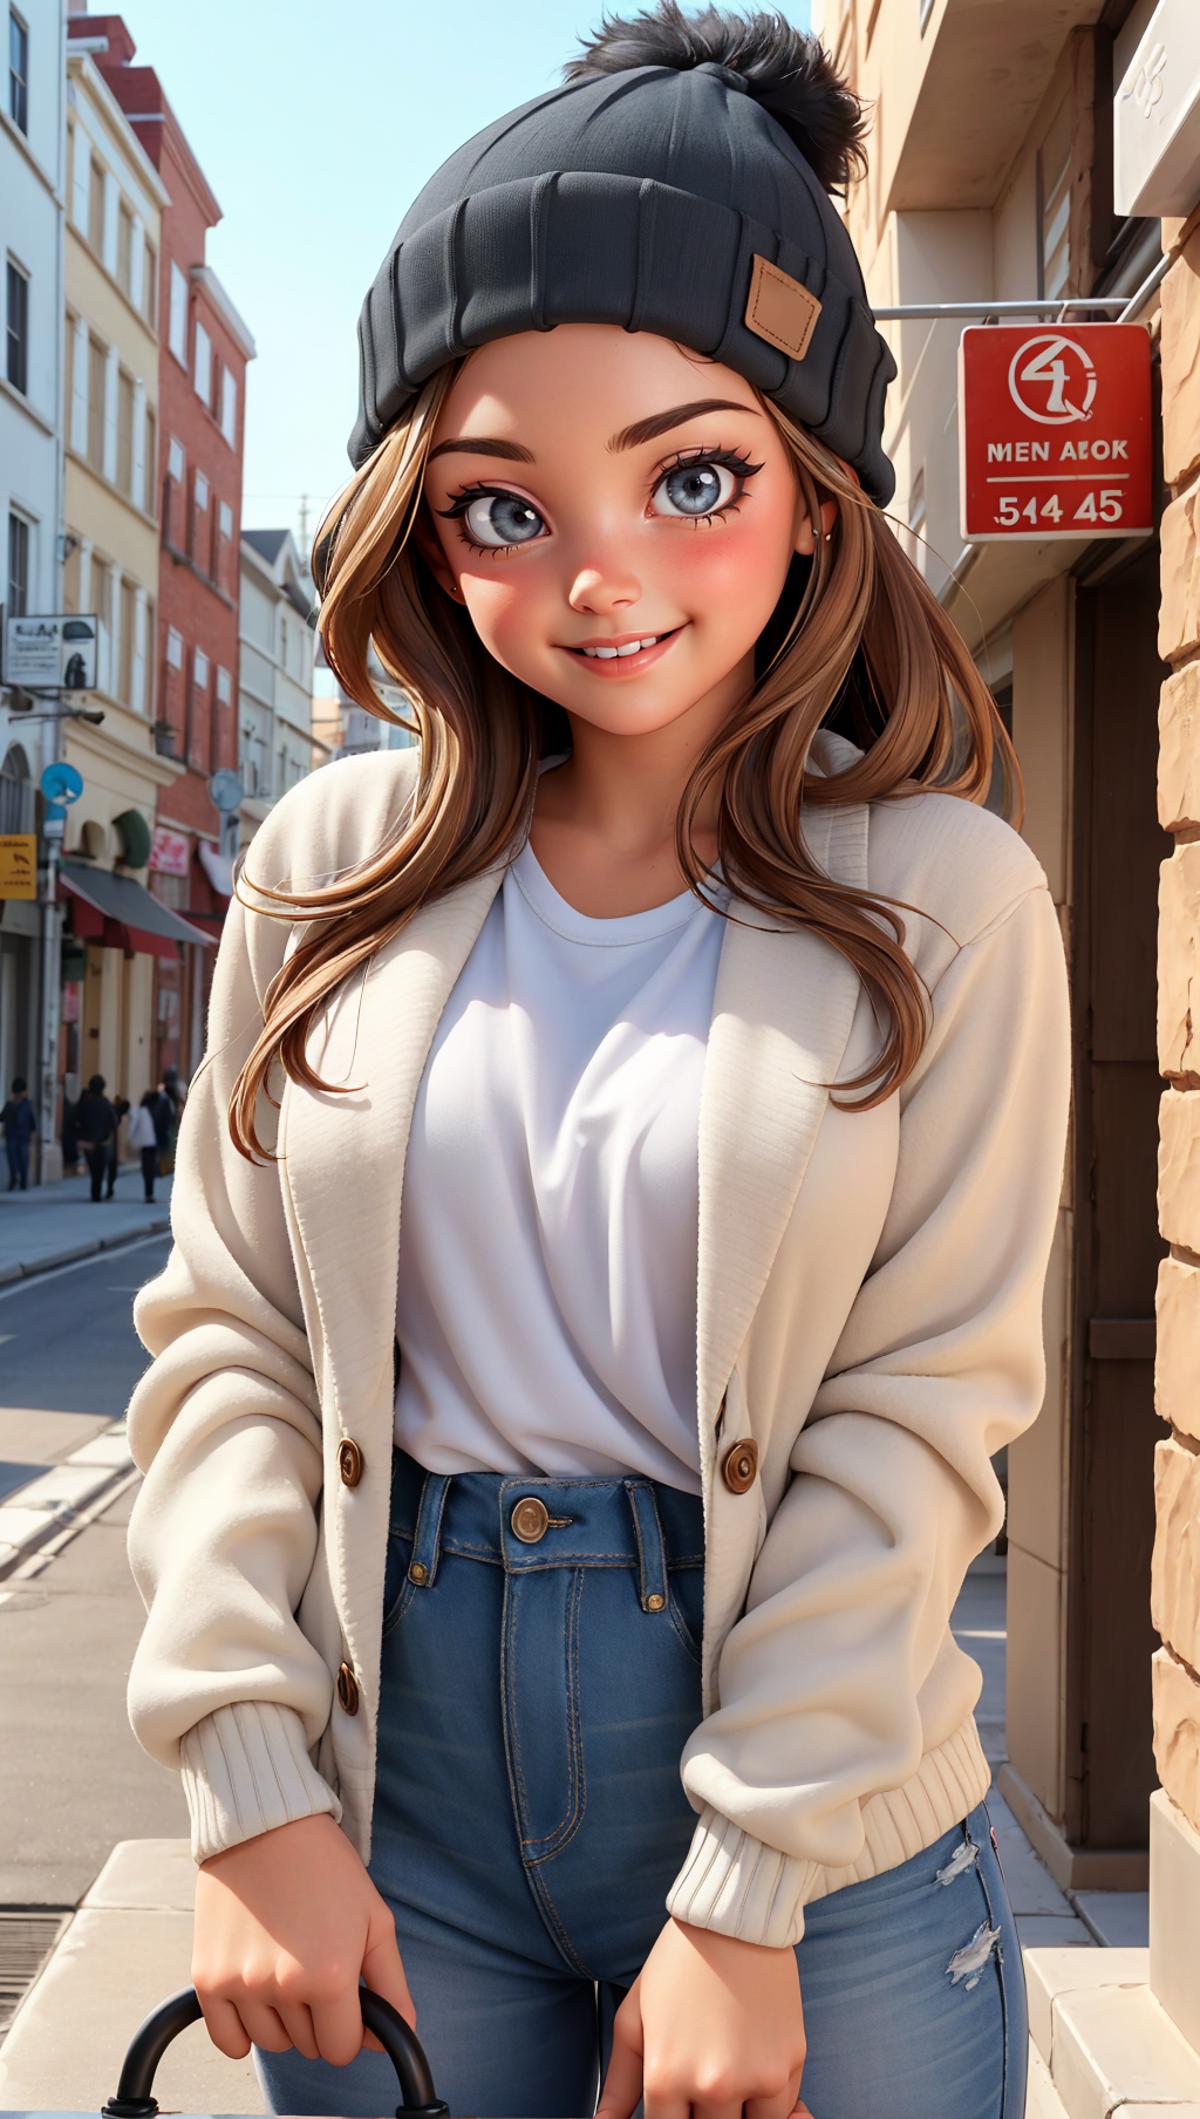 A 3D animated image of a woman wearing a white shirt and blue jeans smiling.